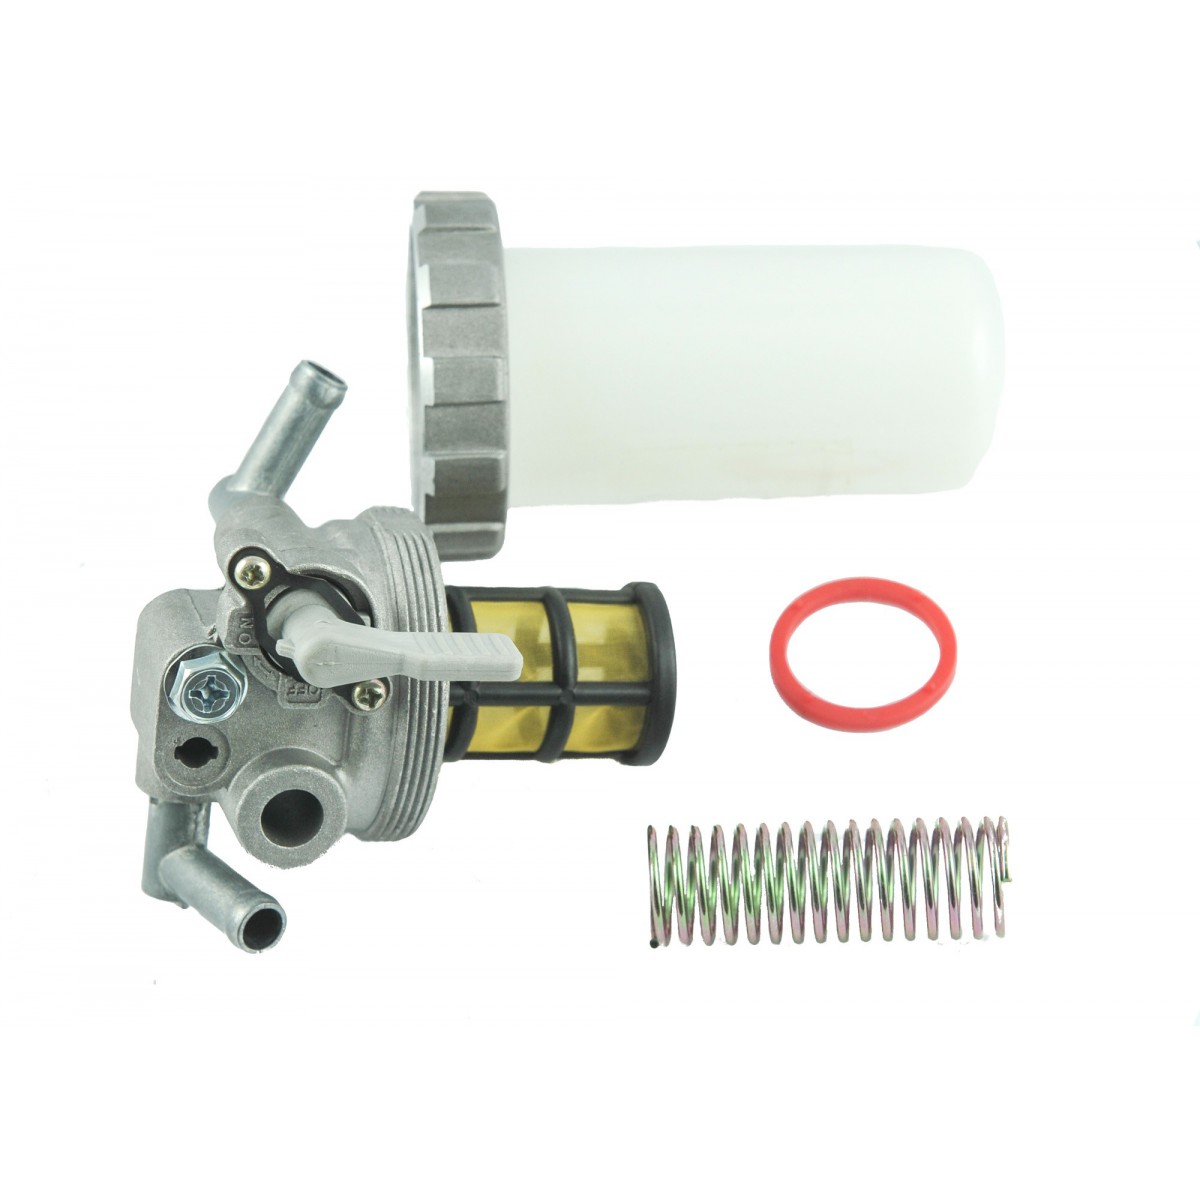 Universal fuel filter with a tap, mesh filter and glass